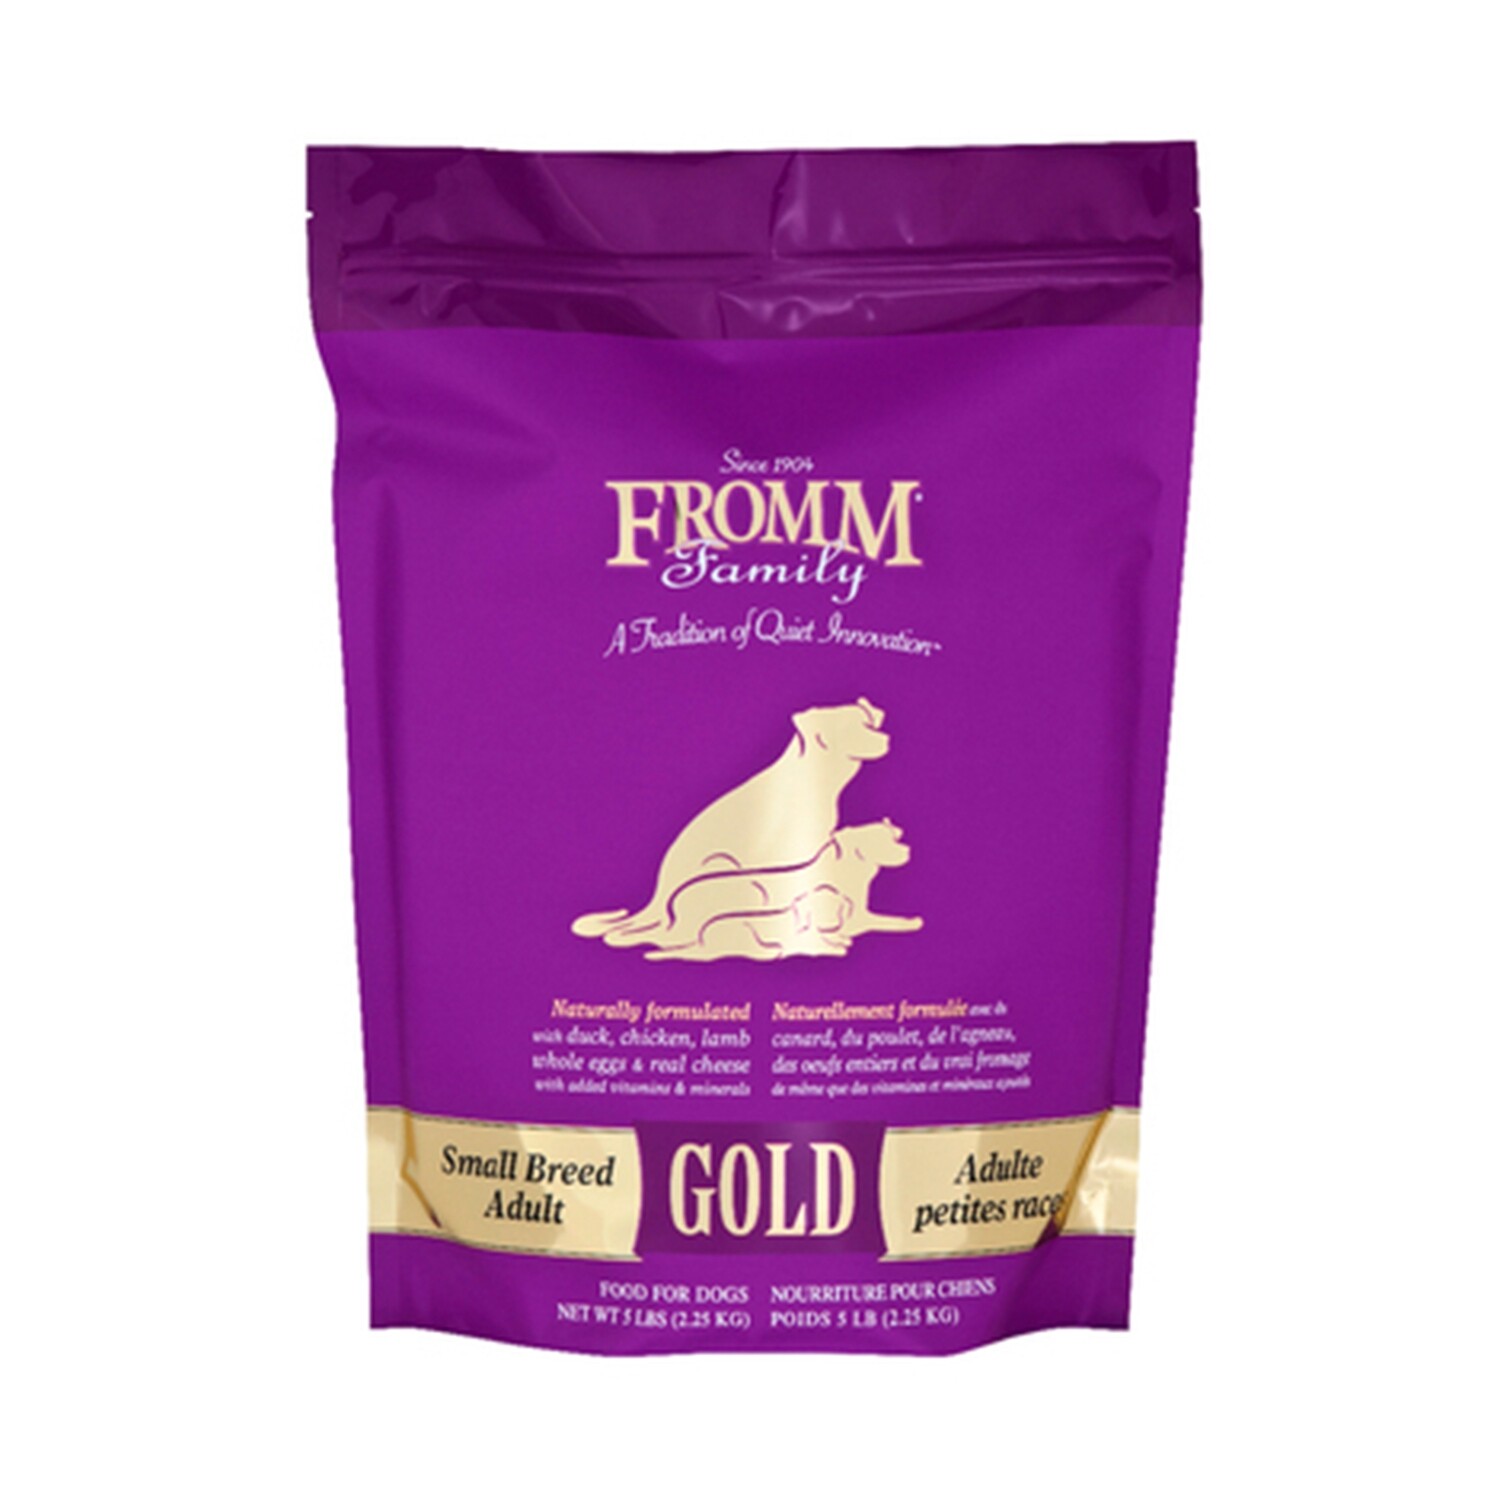 Fromm Gold Small Breed Adult Dry Dog Food - 金装 小型犬成犬狗粮 (BB SEP 02 2022)